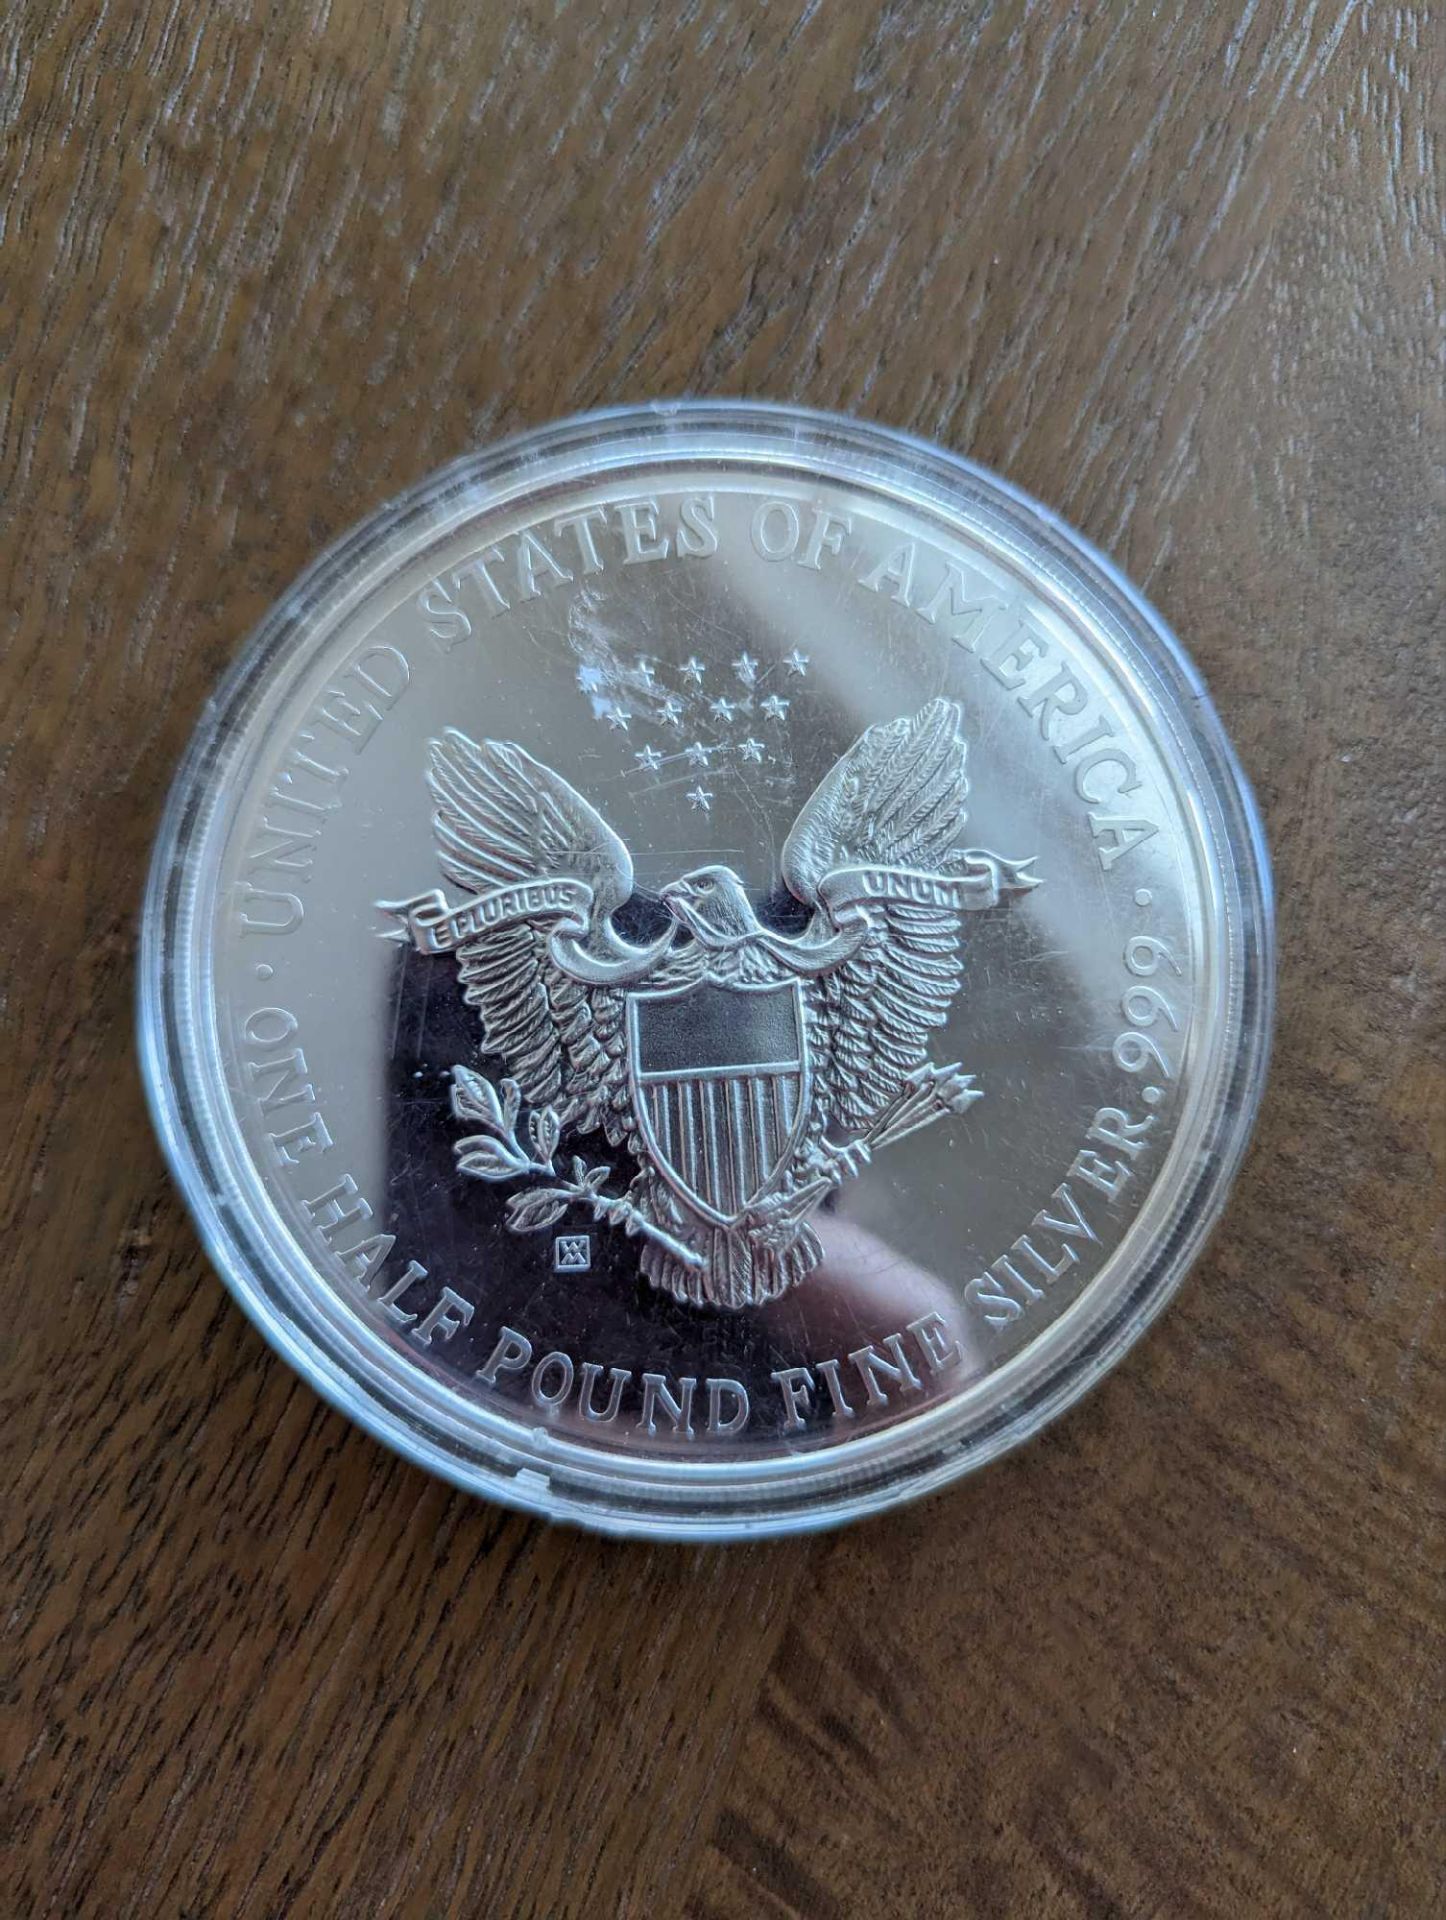 1/2 pound walking liberty silver coin 1995 - Image 3 of 3